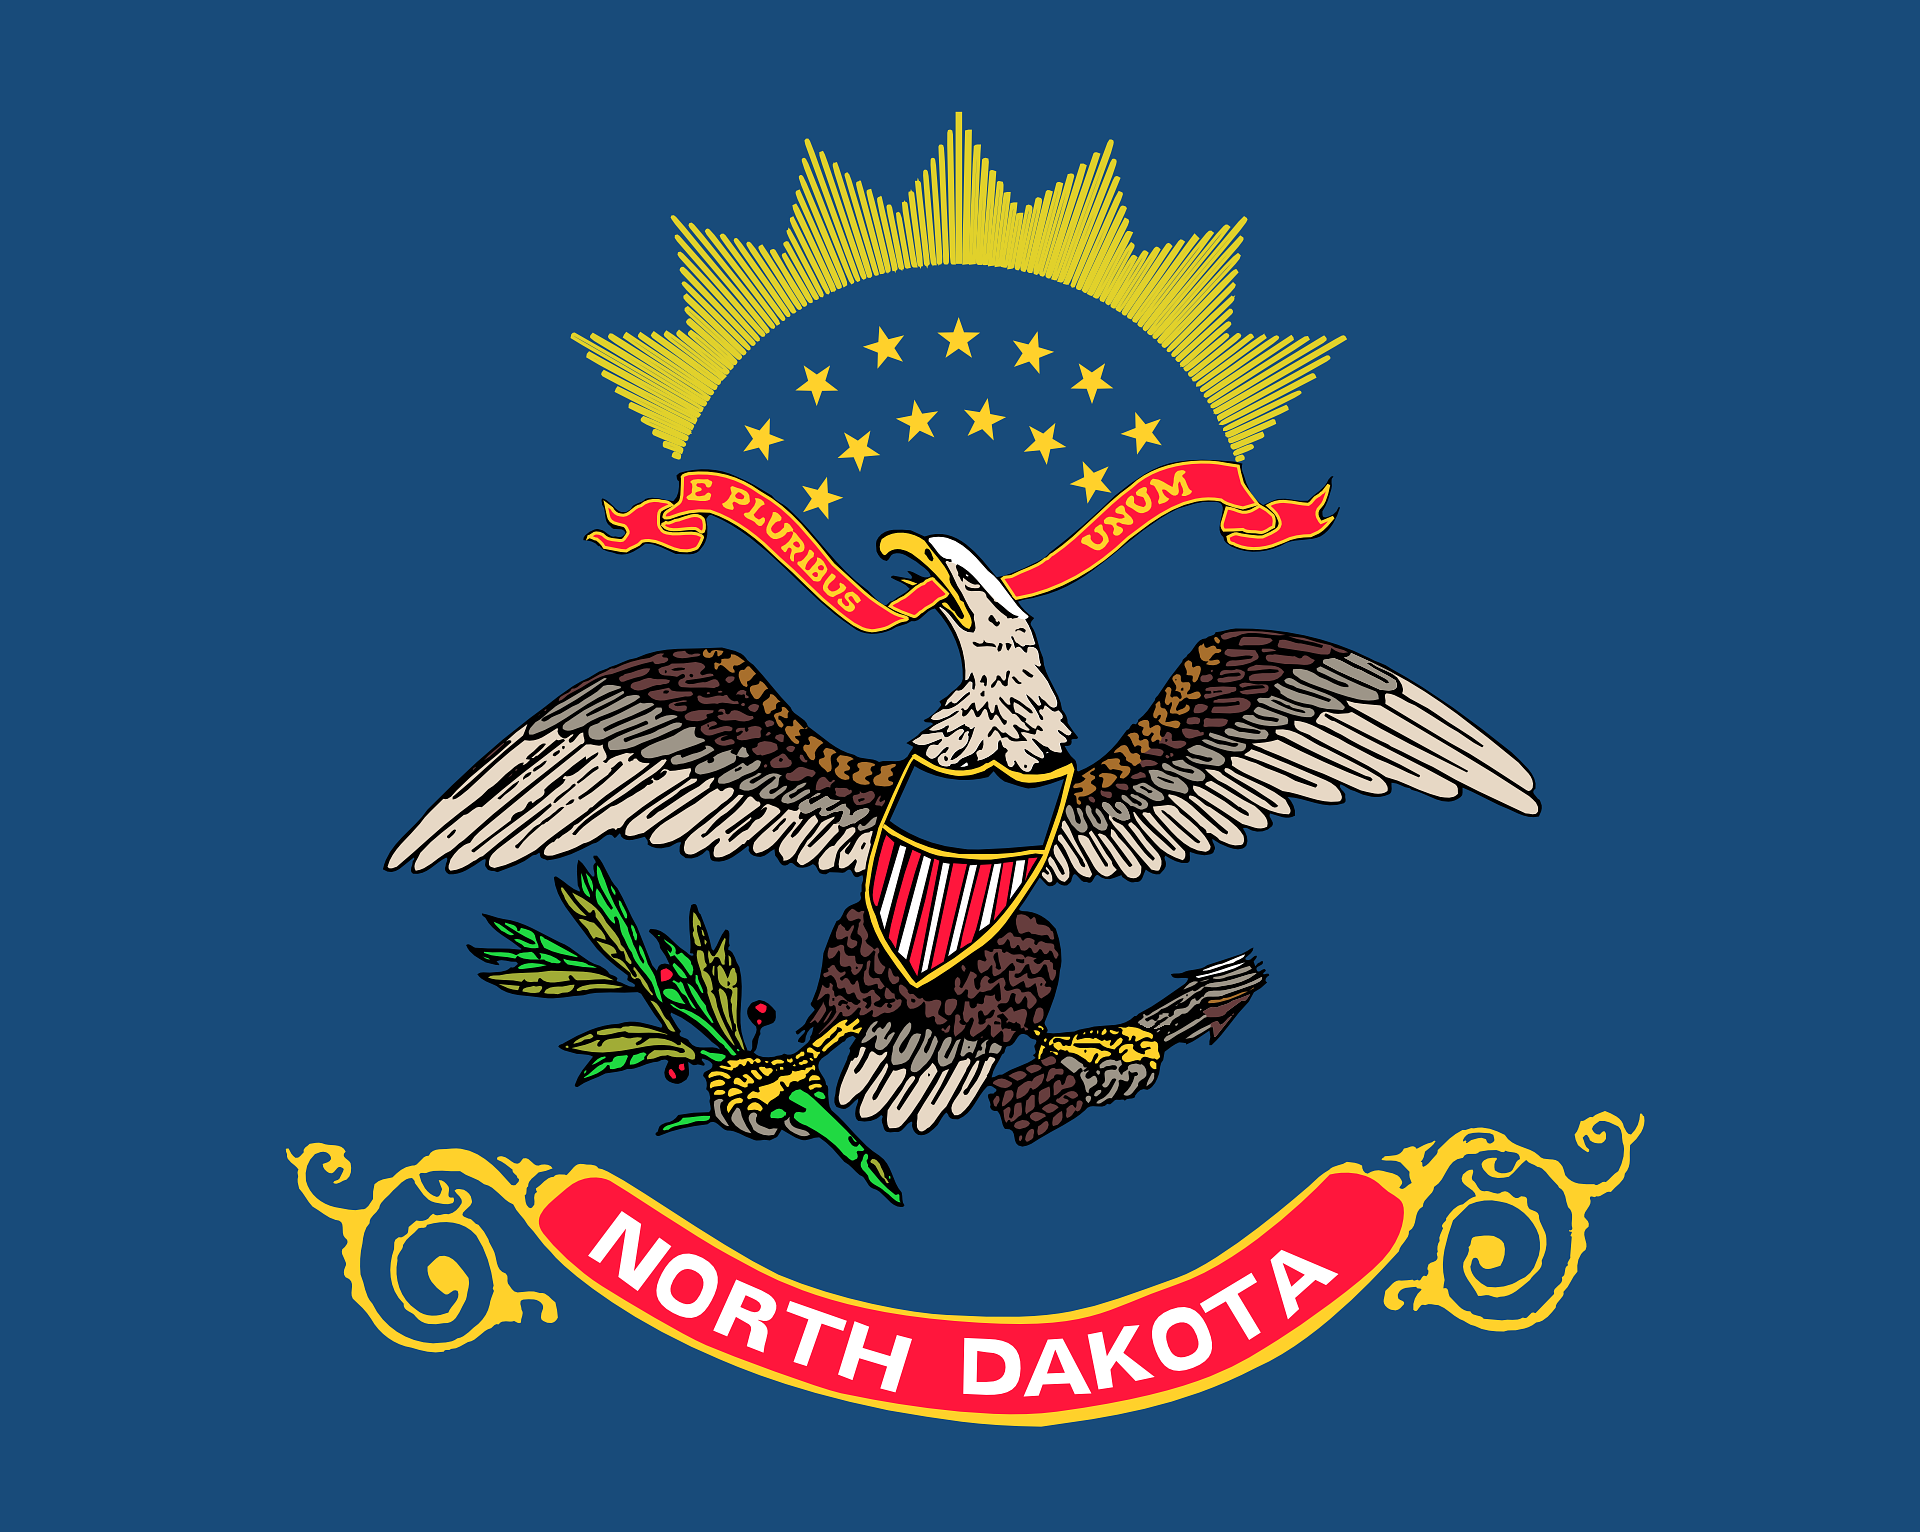 Image for North Dakota is bucking small business trends